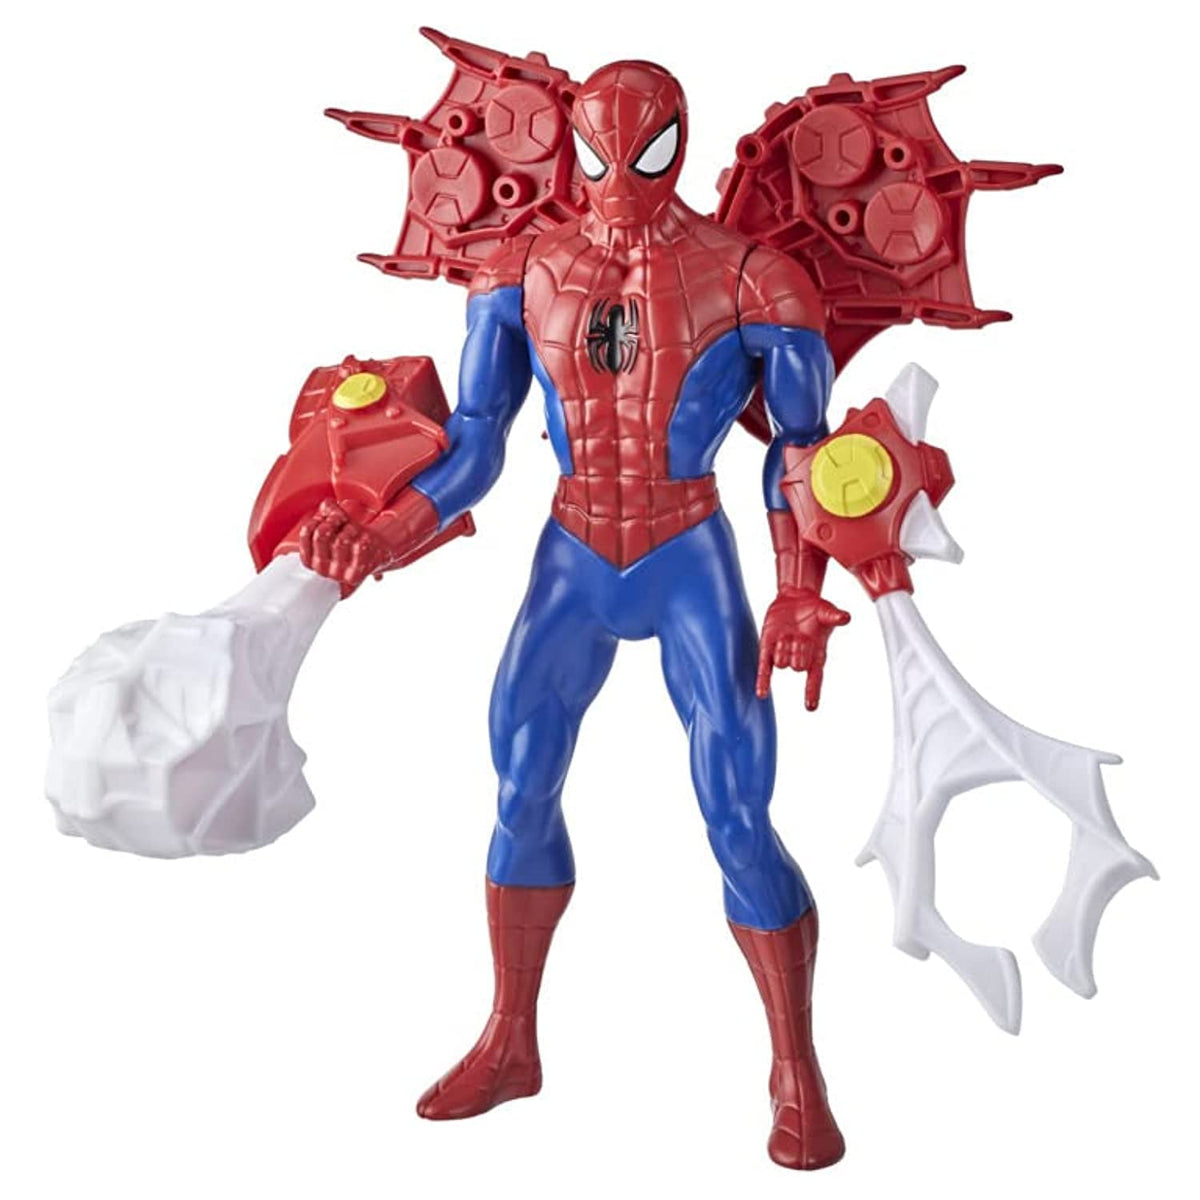 Marvel 9.5-inch Scale Collectible Super Heroes Spider-Man Action Figure with 3 Accessories for Kids Ages 4 and Up